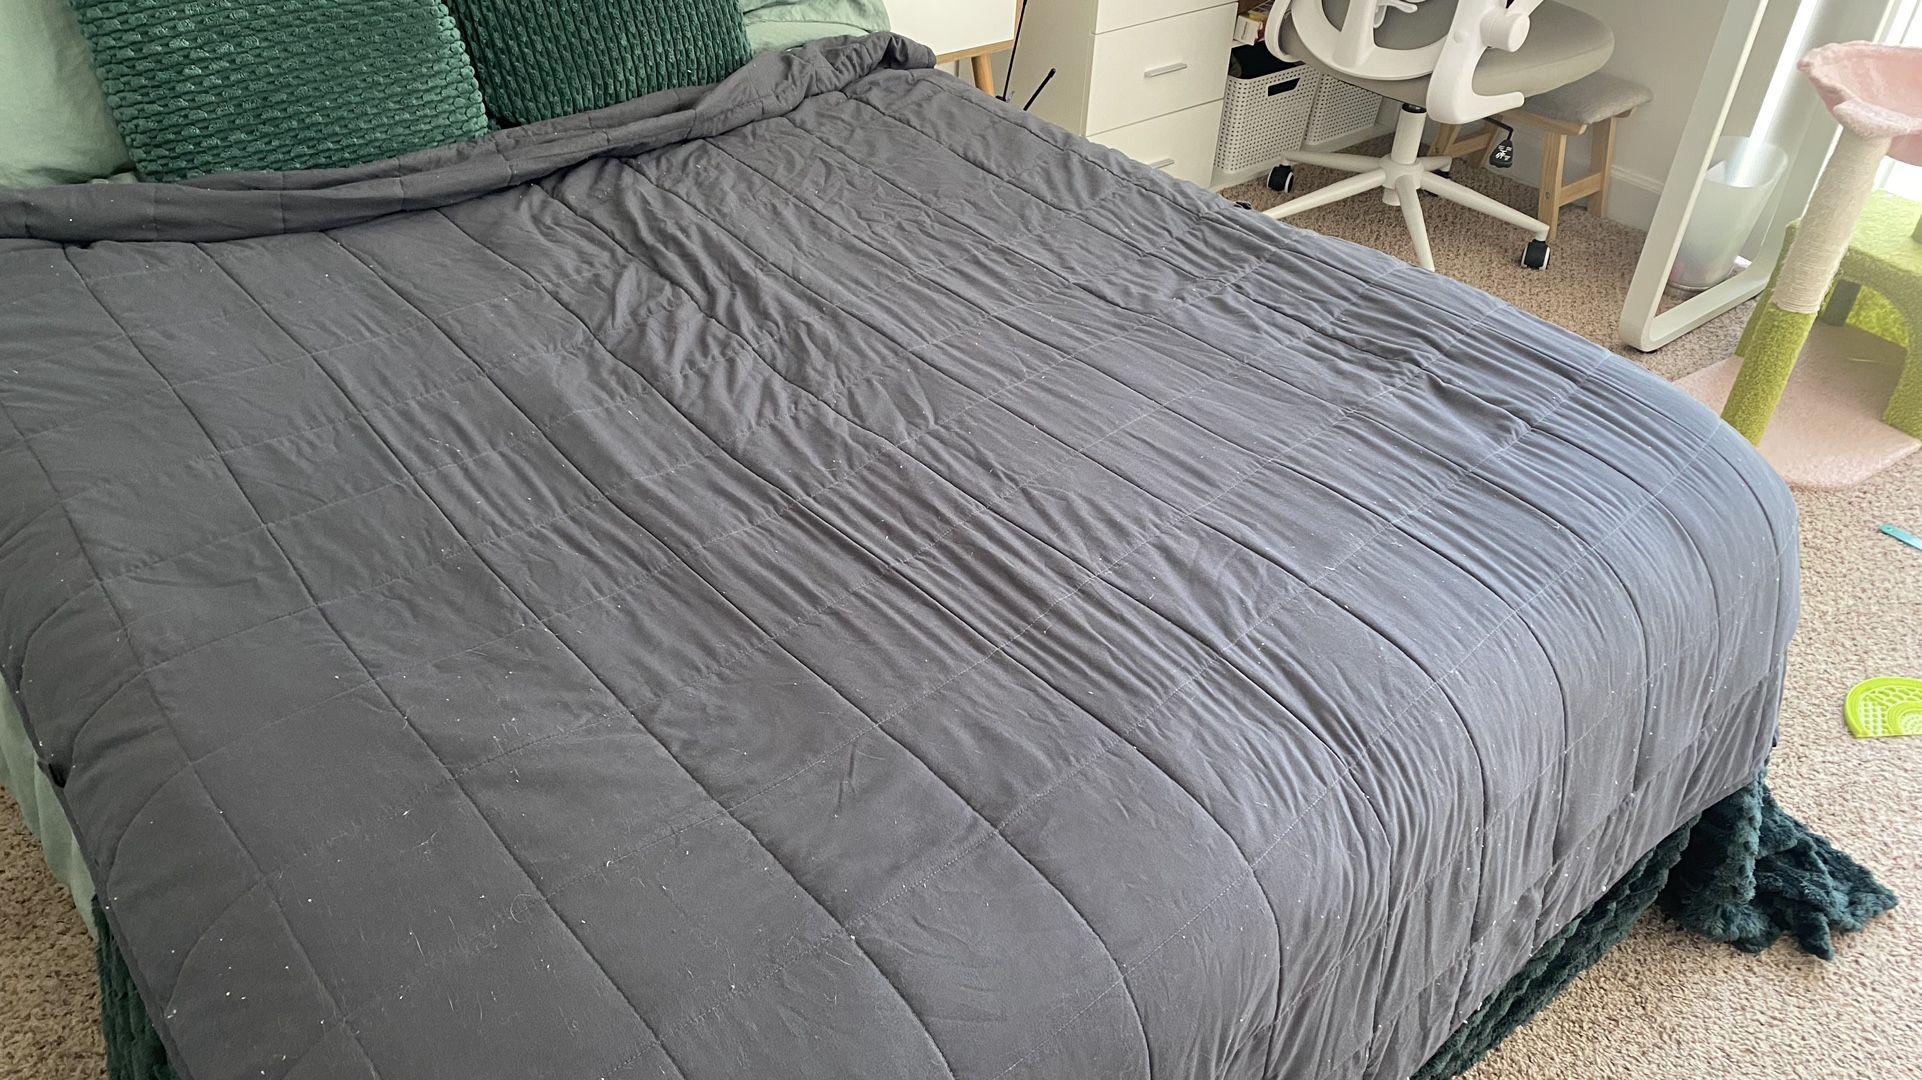 20 Lb weighted blanket